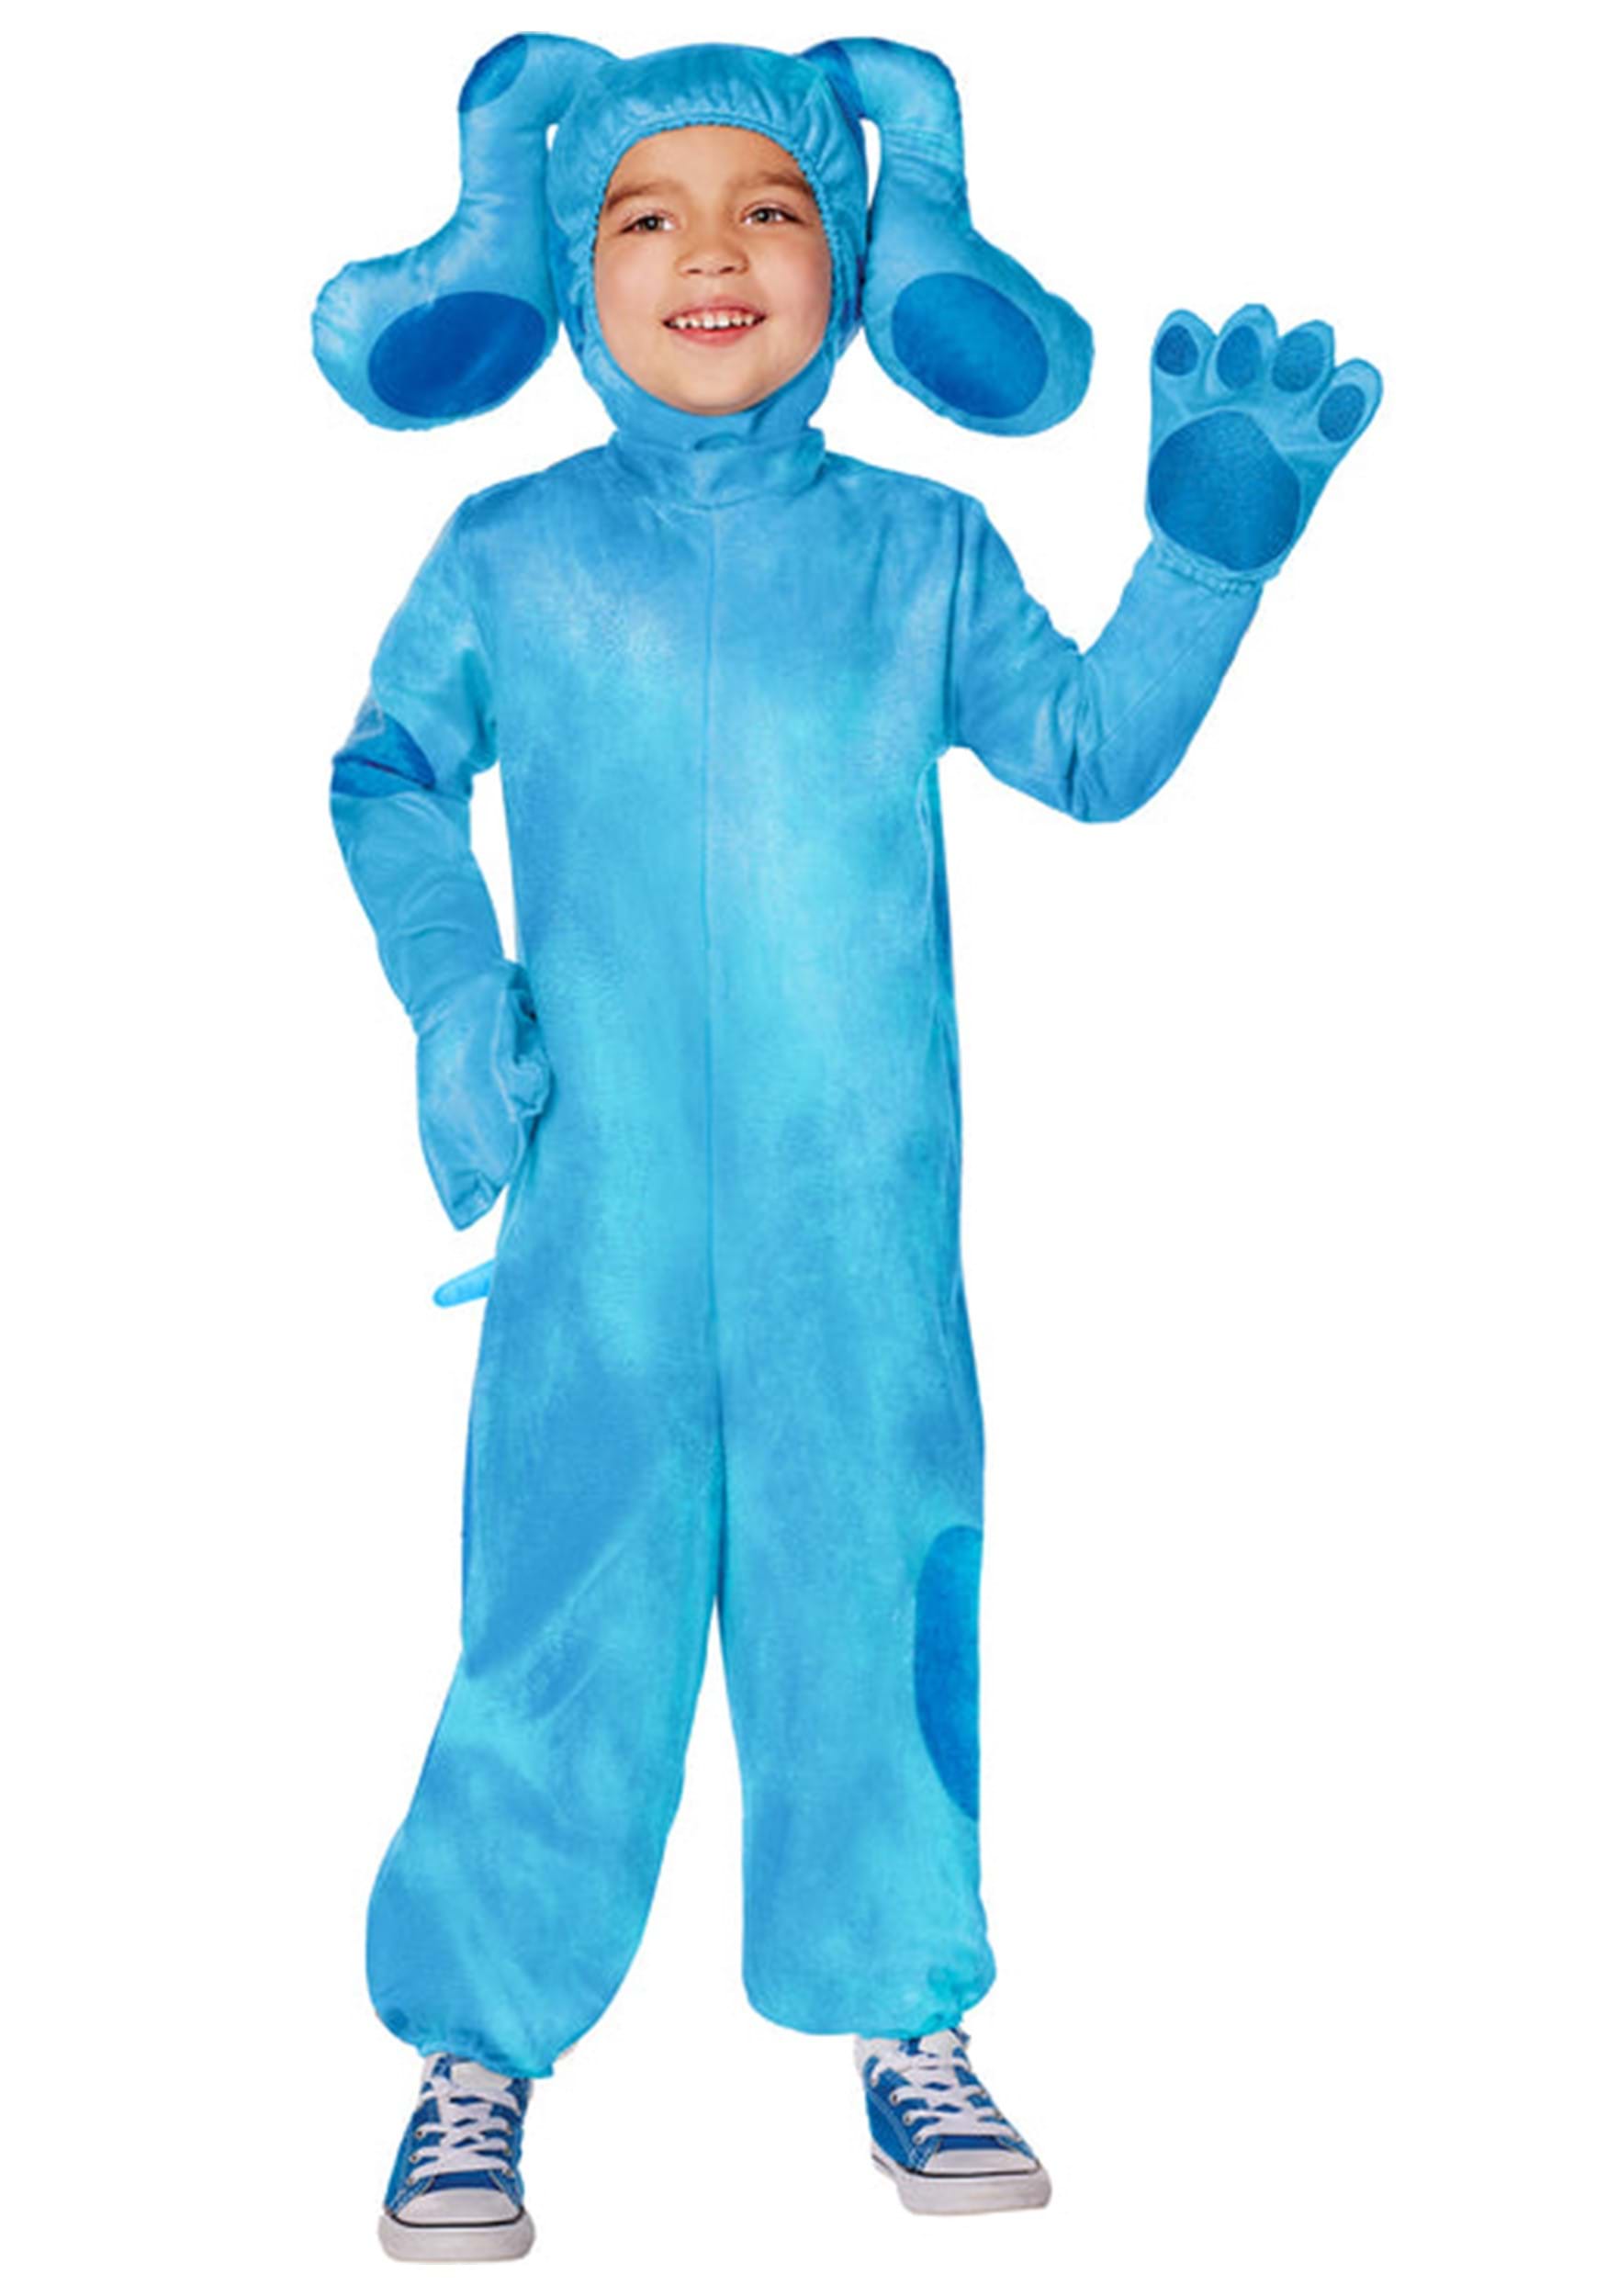 Blues Clues Blue Toddler Costume